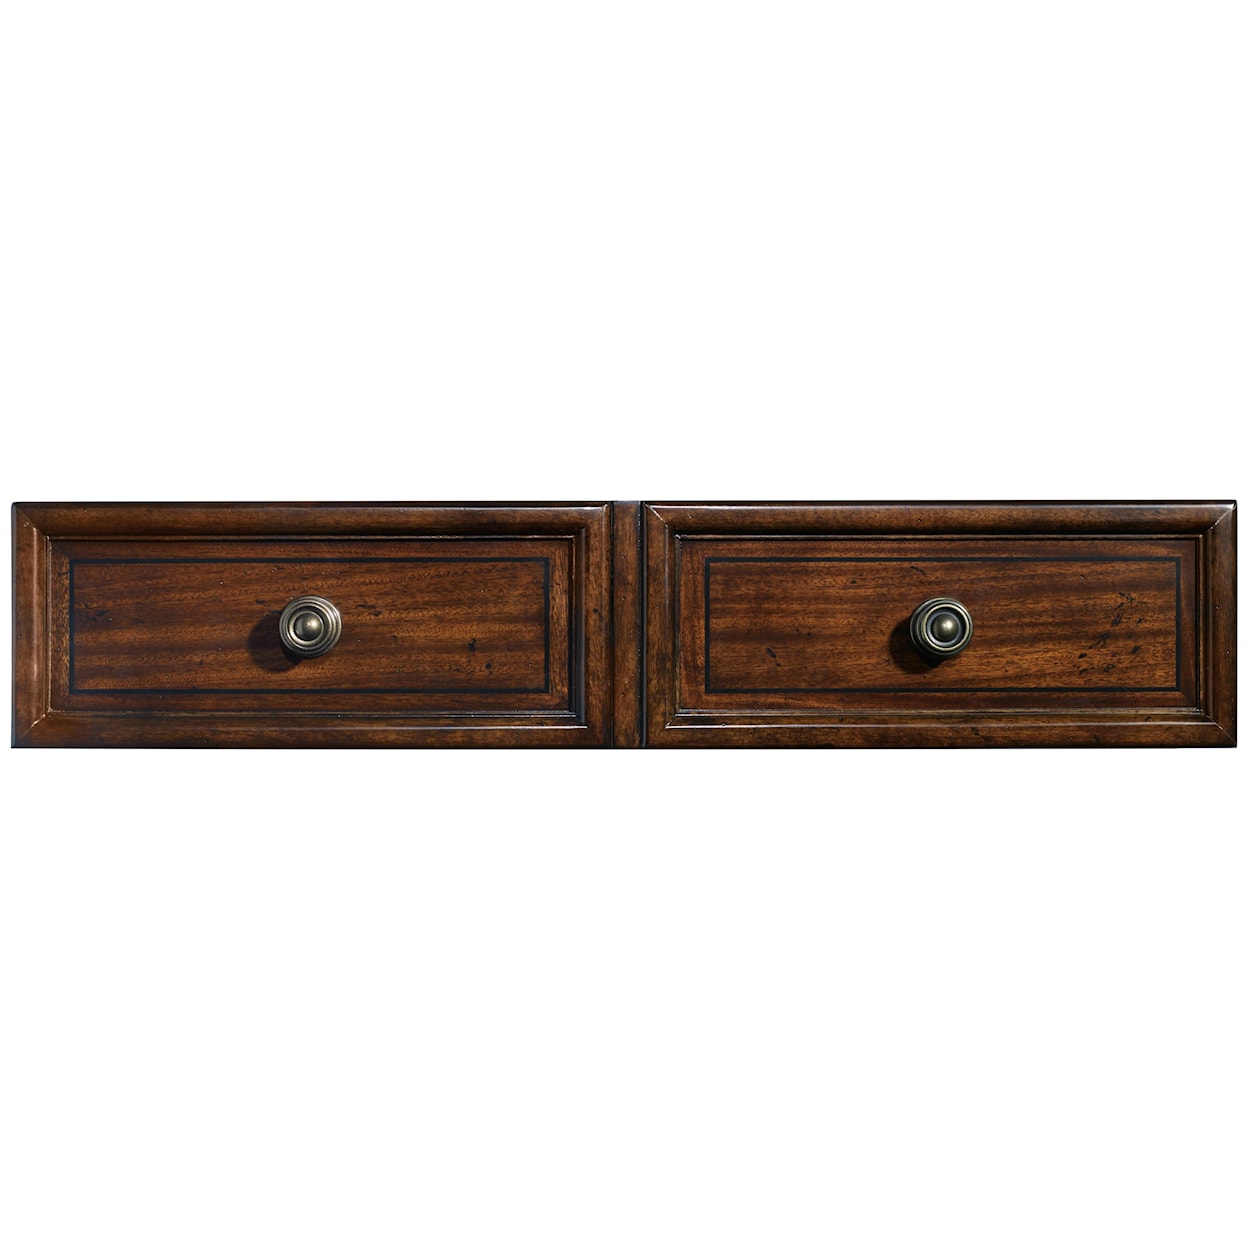 Hooker Furniture Leesburg Chest of Drawers